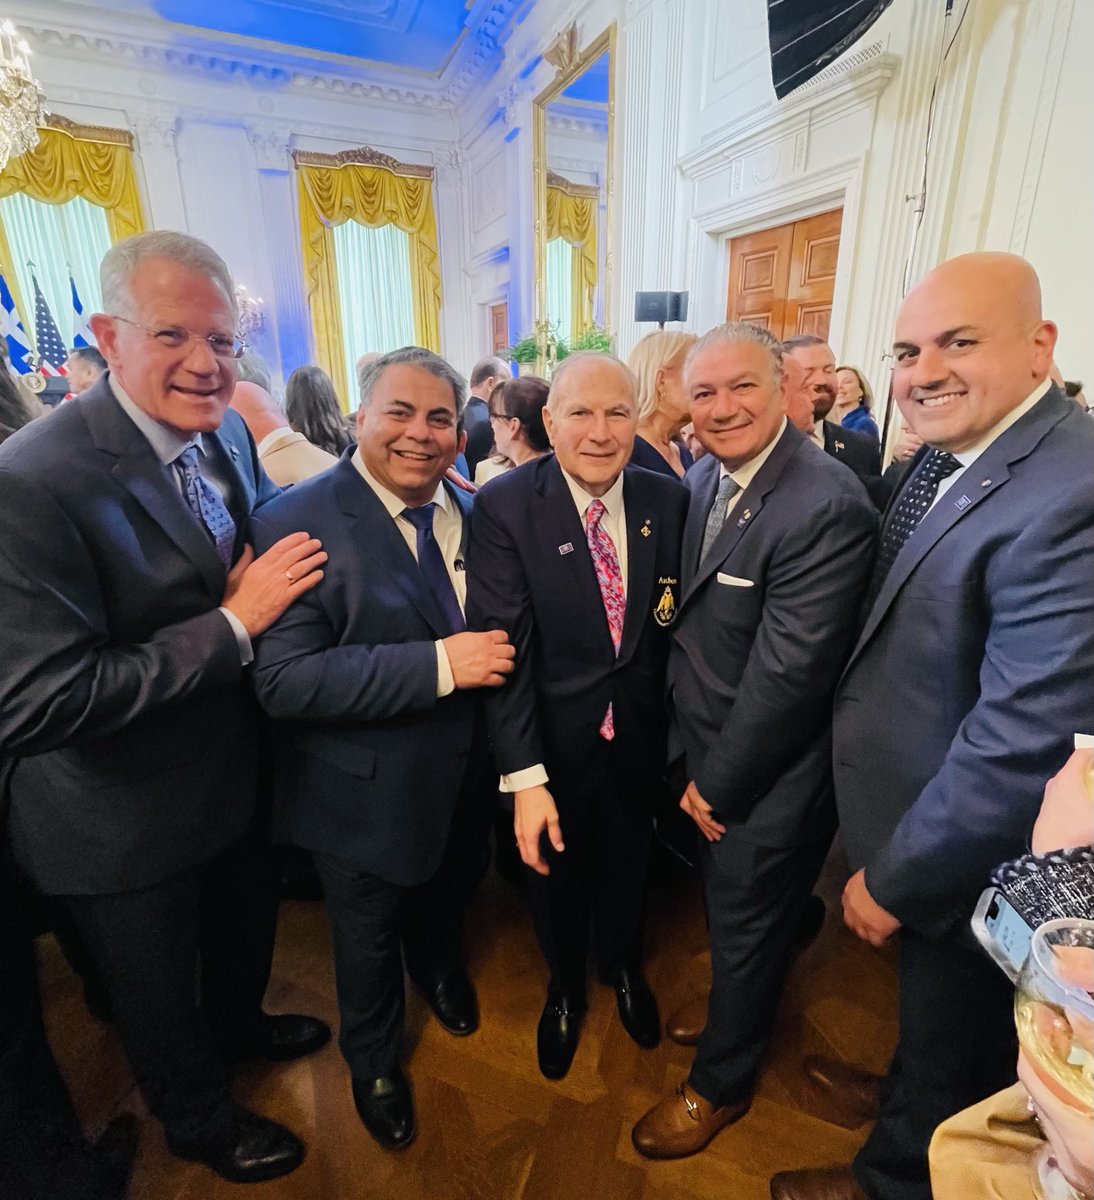 Greek Independence Day celebration ⁦@WhiteHouse⁩ w ⁦@OrderStAndrew⁩ Natl Commander Anthony Limberakis ⁦@OrderOfAHEPA⁩ Bd Chair ⁦@NicholasKaraco1⁩ and an East Wing filled w Greeks! Long live 🇬🇷 Long live 🇨🇾 #DefendHellenism ⁦@POTUS⁩ ⁦@goarch⁩